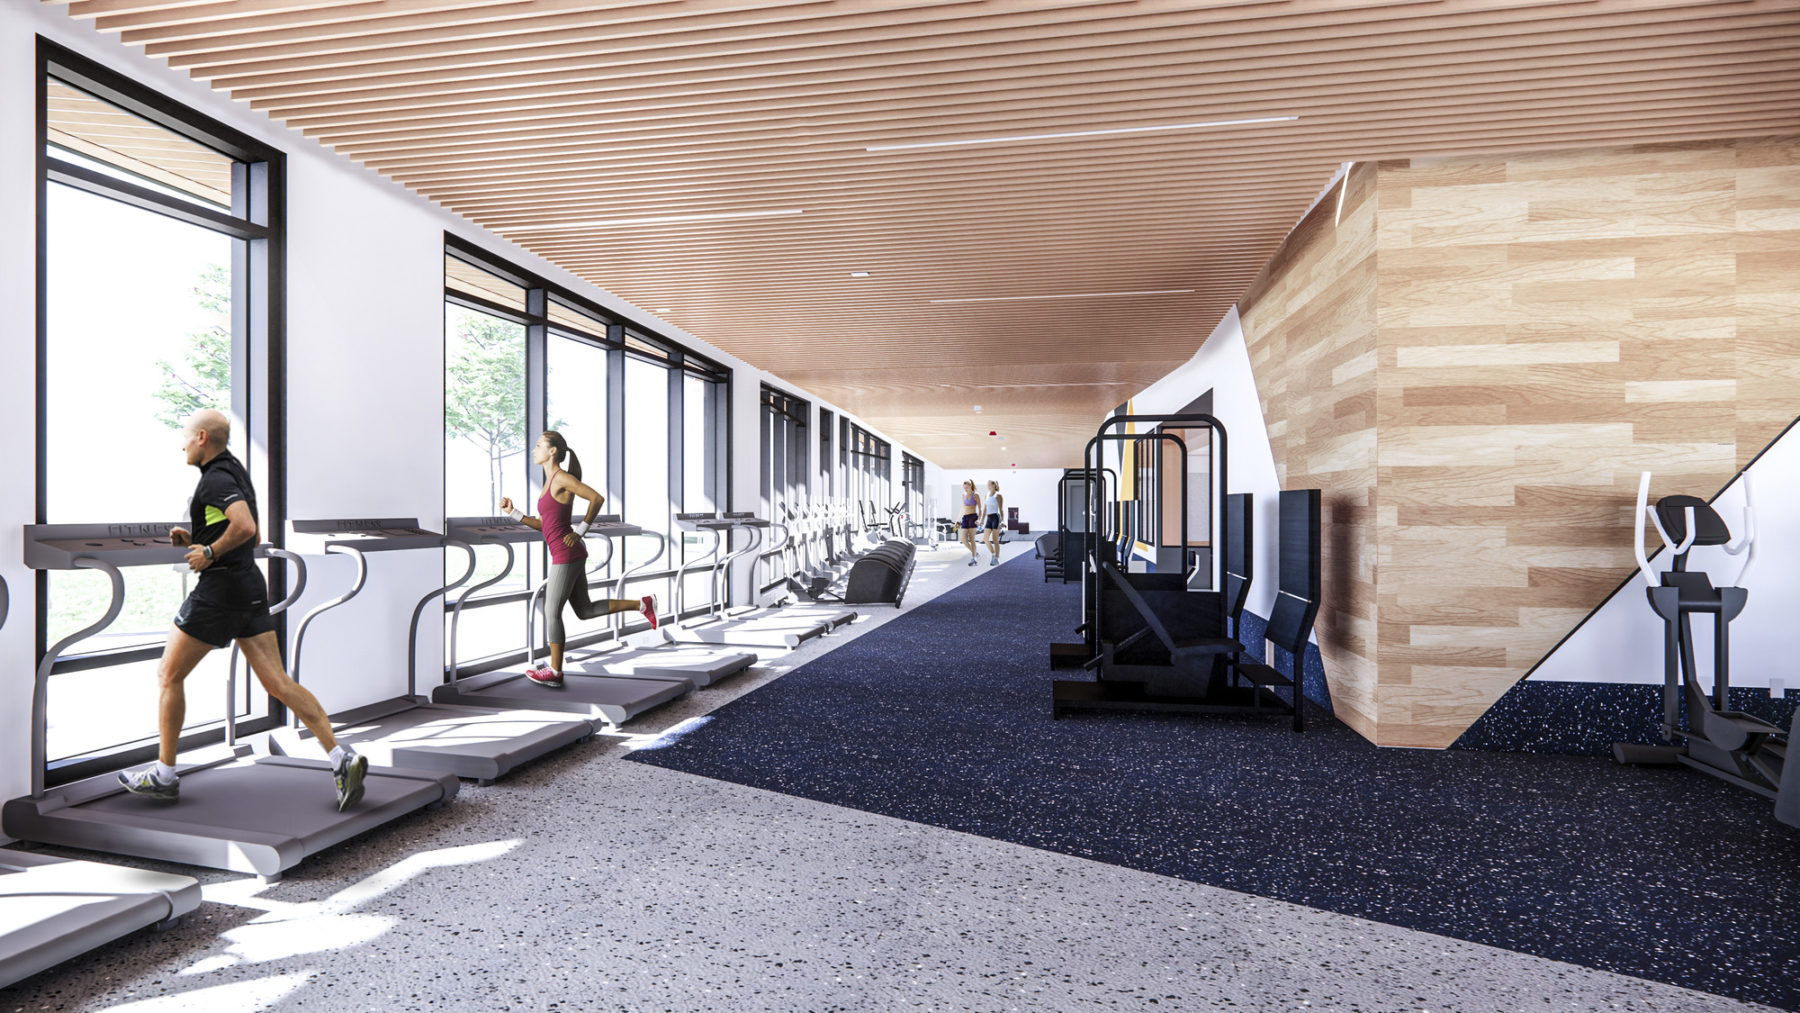 Interior rendering of fitness area. A man and a woman run on treadmills in the foreground.